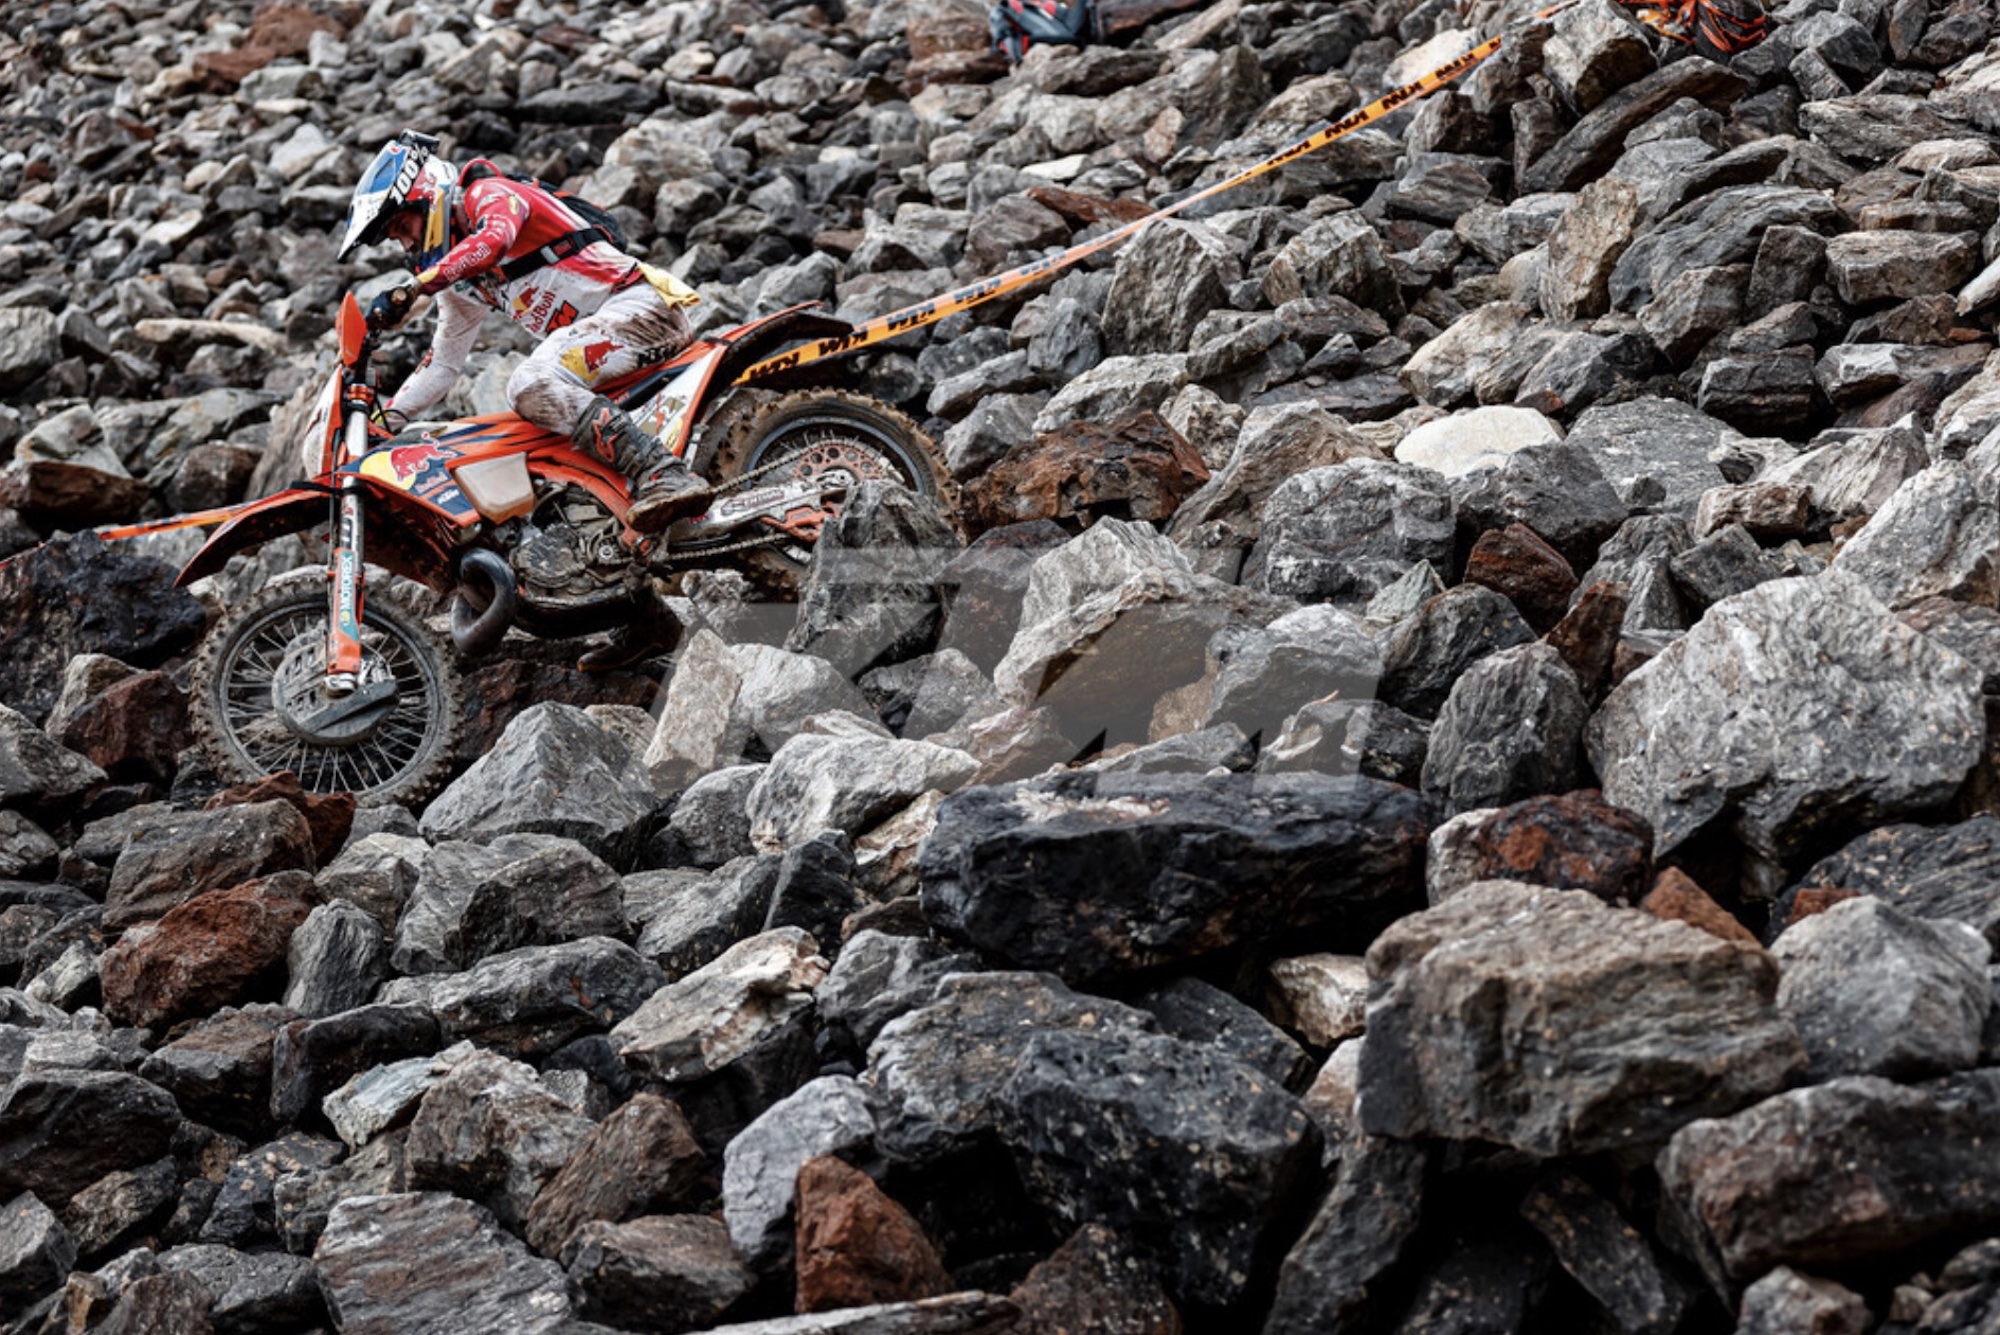 A view of KTM's team at Erzberg 2023. Media sourced from KTM.